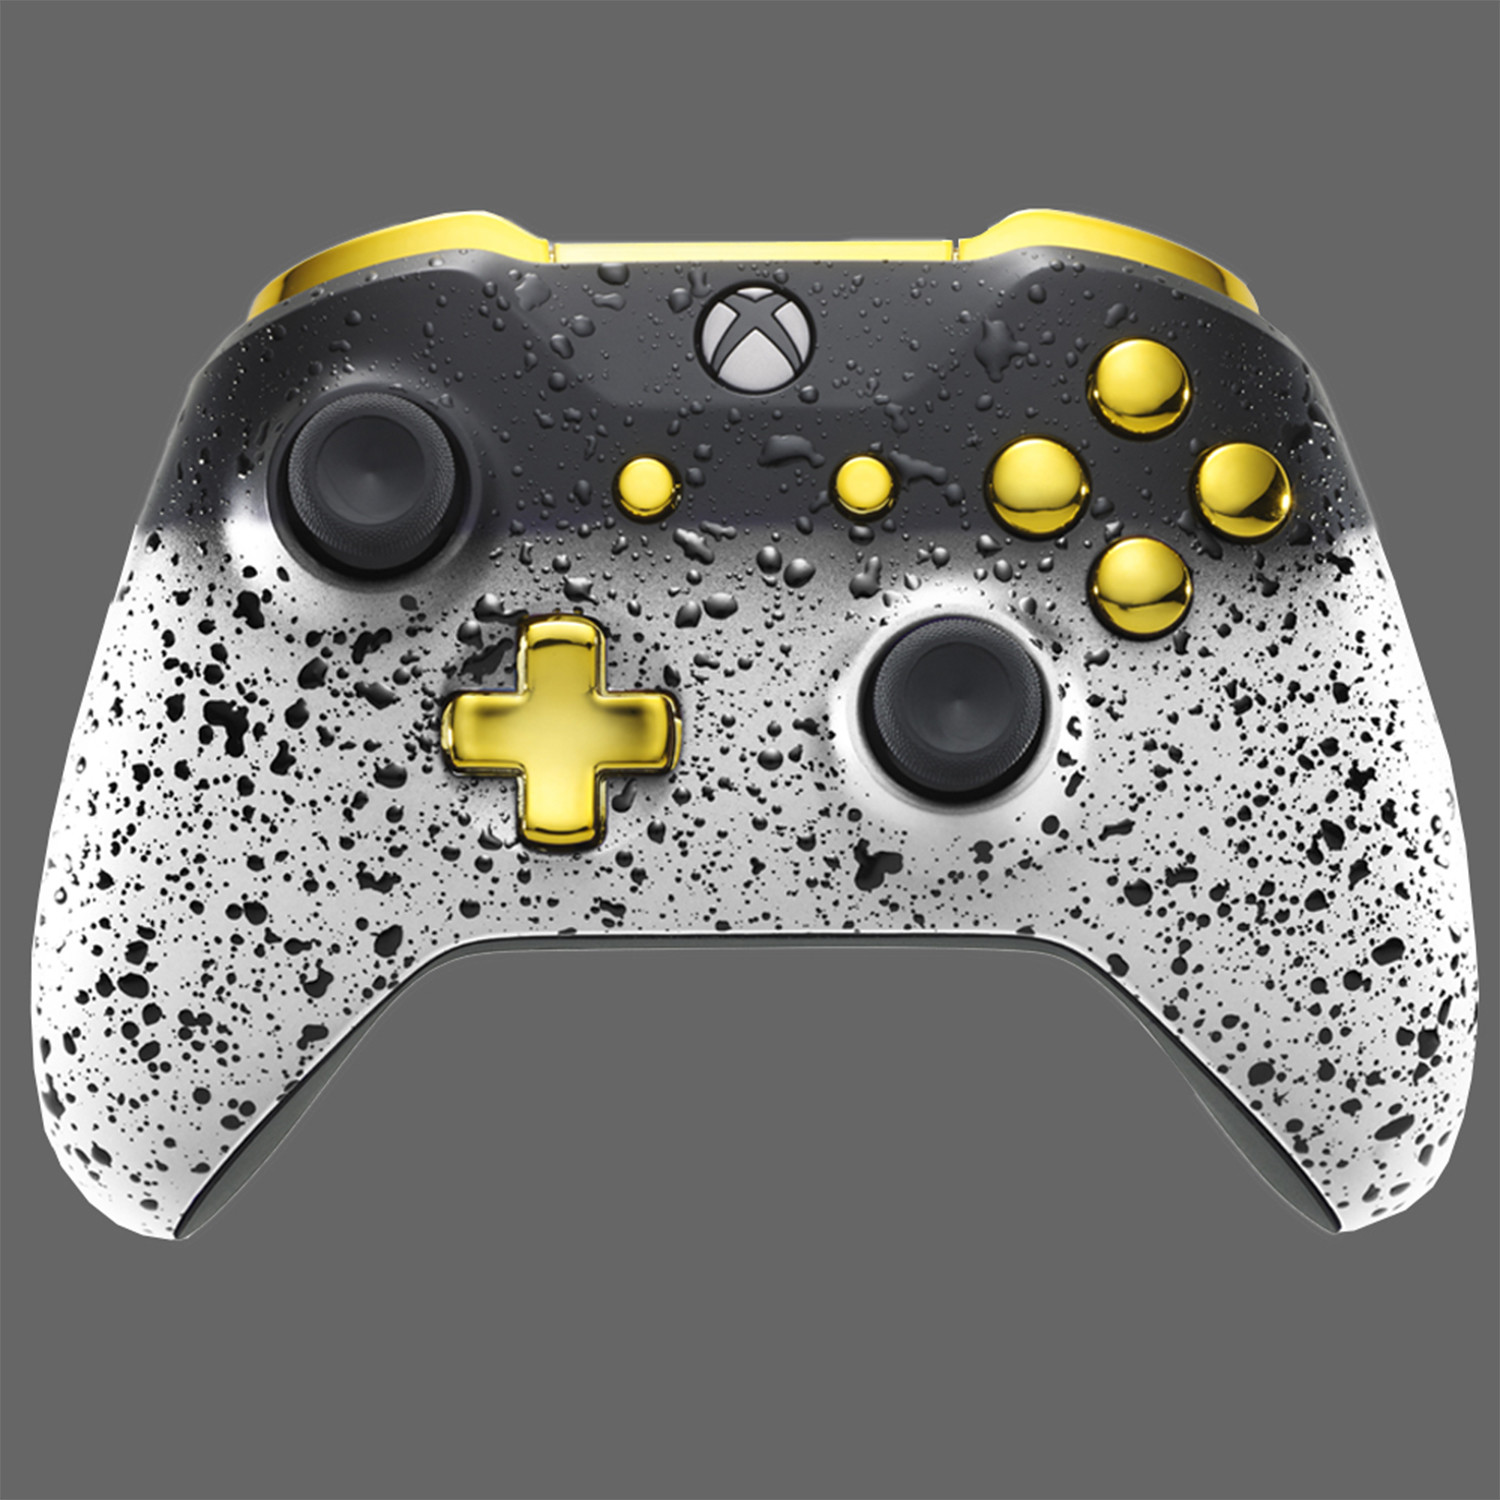 fully customizable xbox one controllers